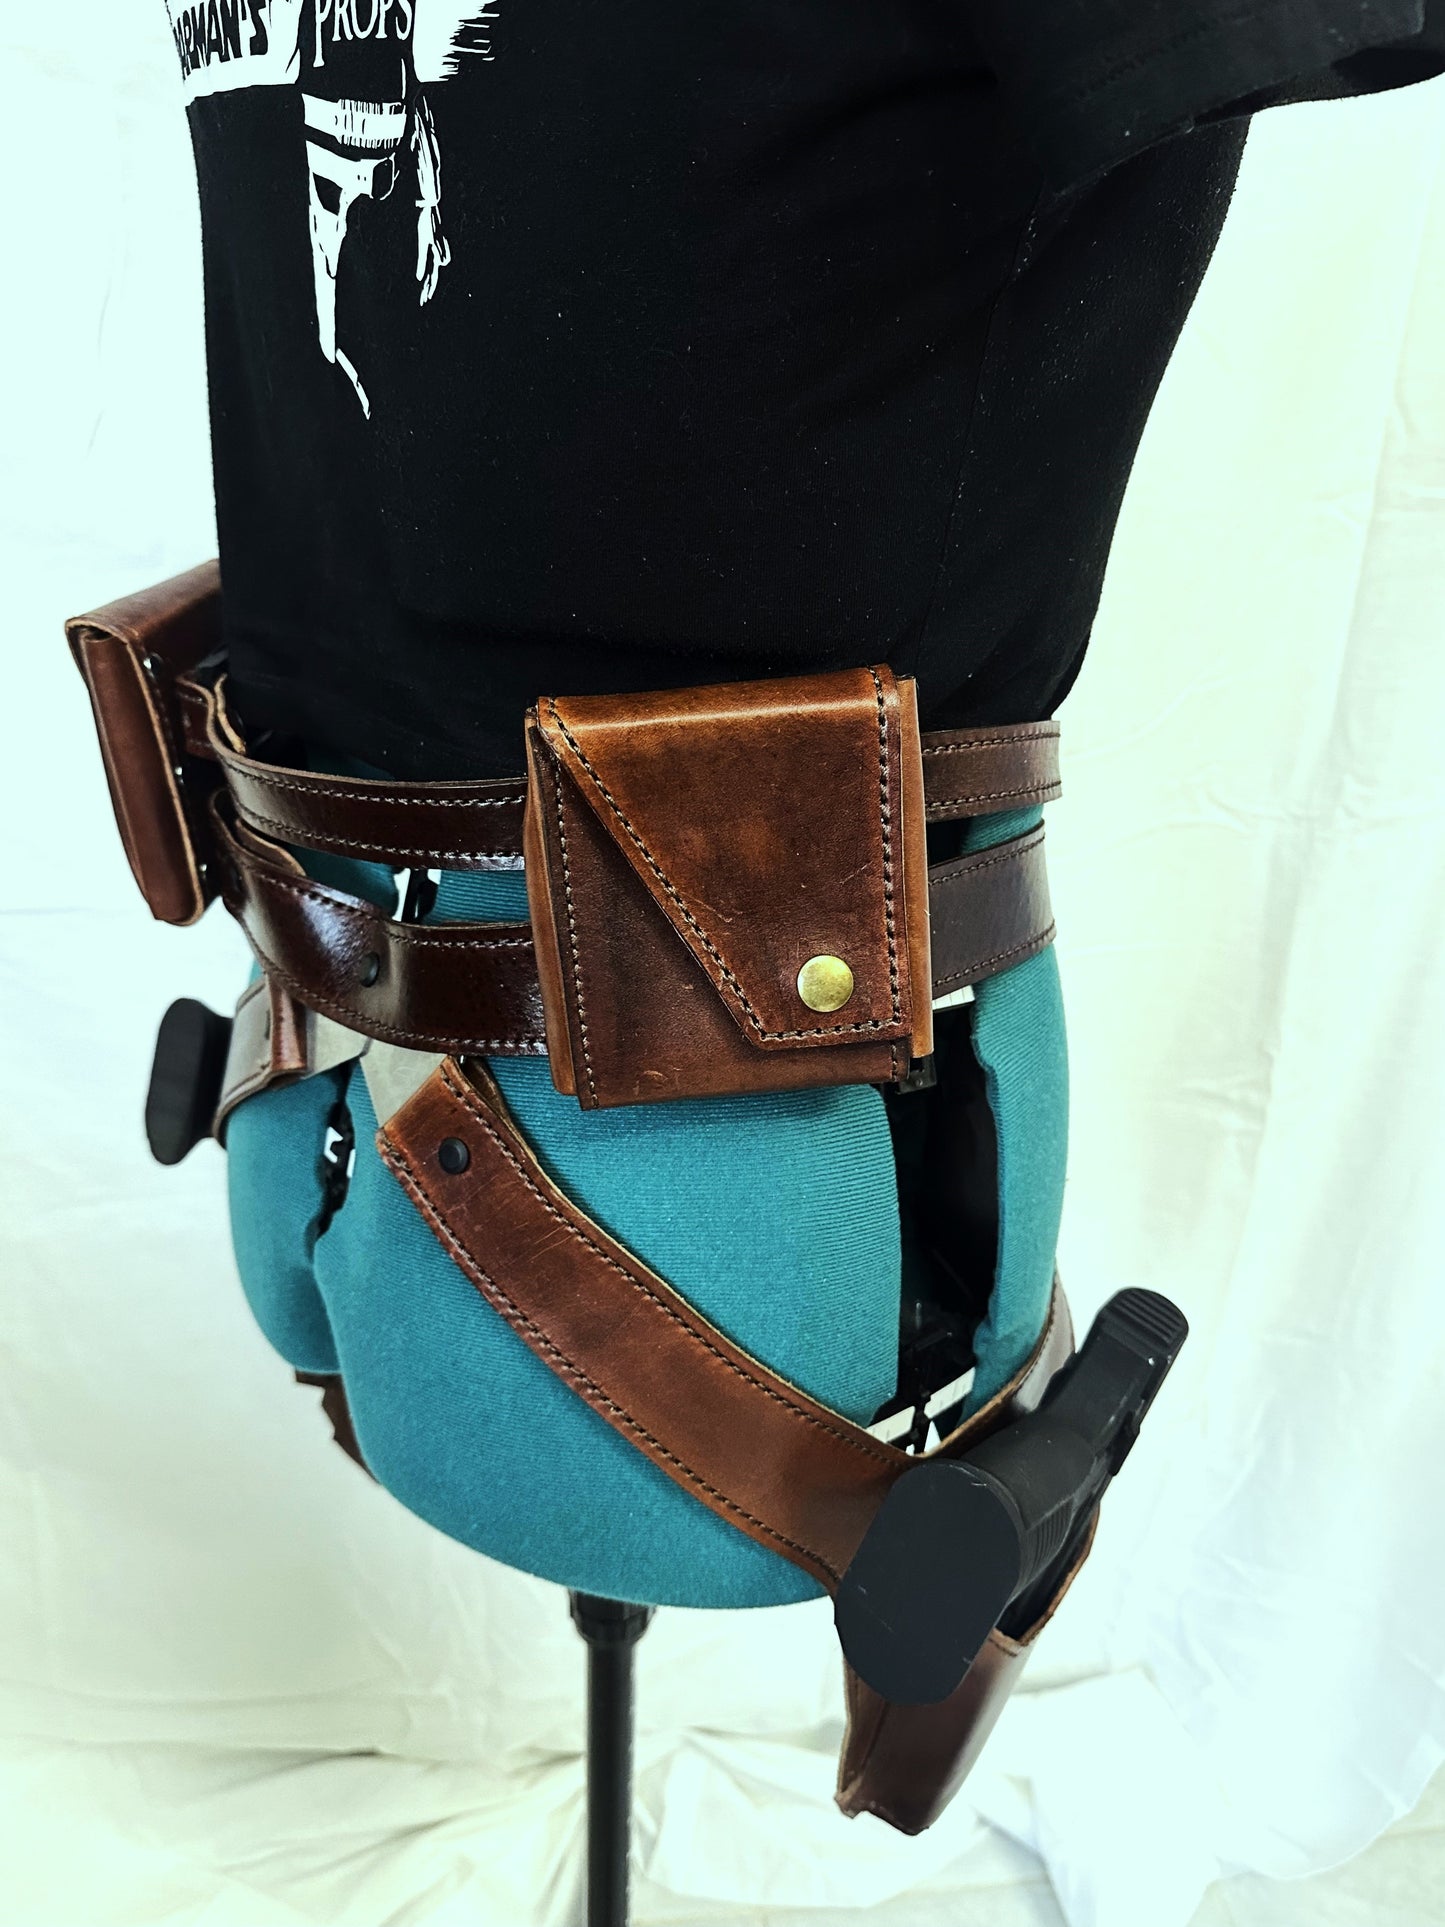 Live action Sabine Wren Belts, Pouches, and Double Holster Rig